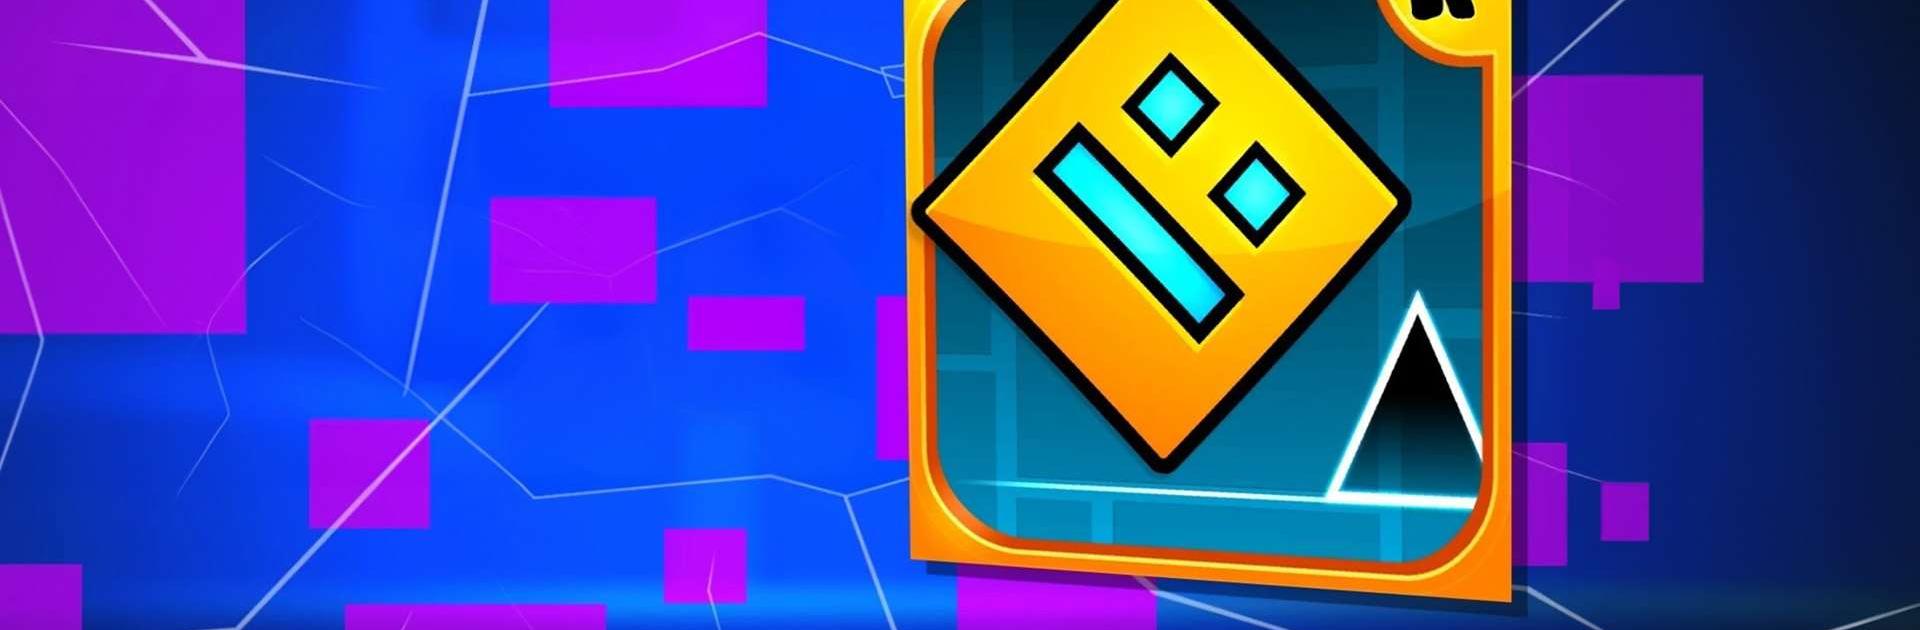 Geometry Dash - FunnyGame Holiday By FunnyGame 